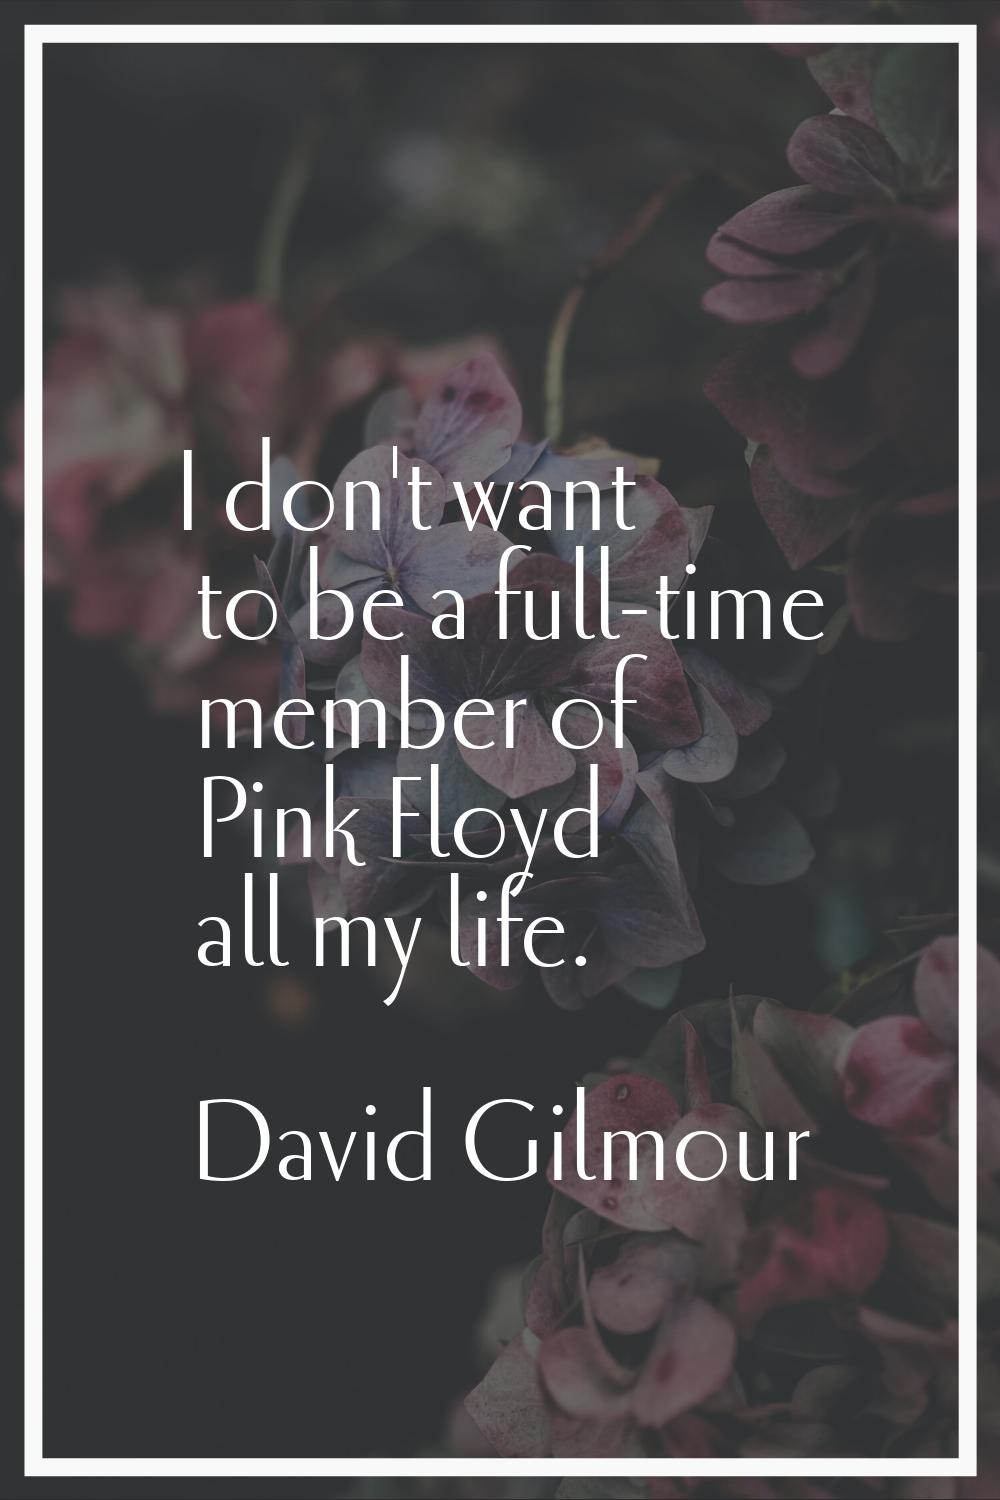 I don't want to be a full-time member of Pink Floyd all my life.